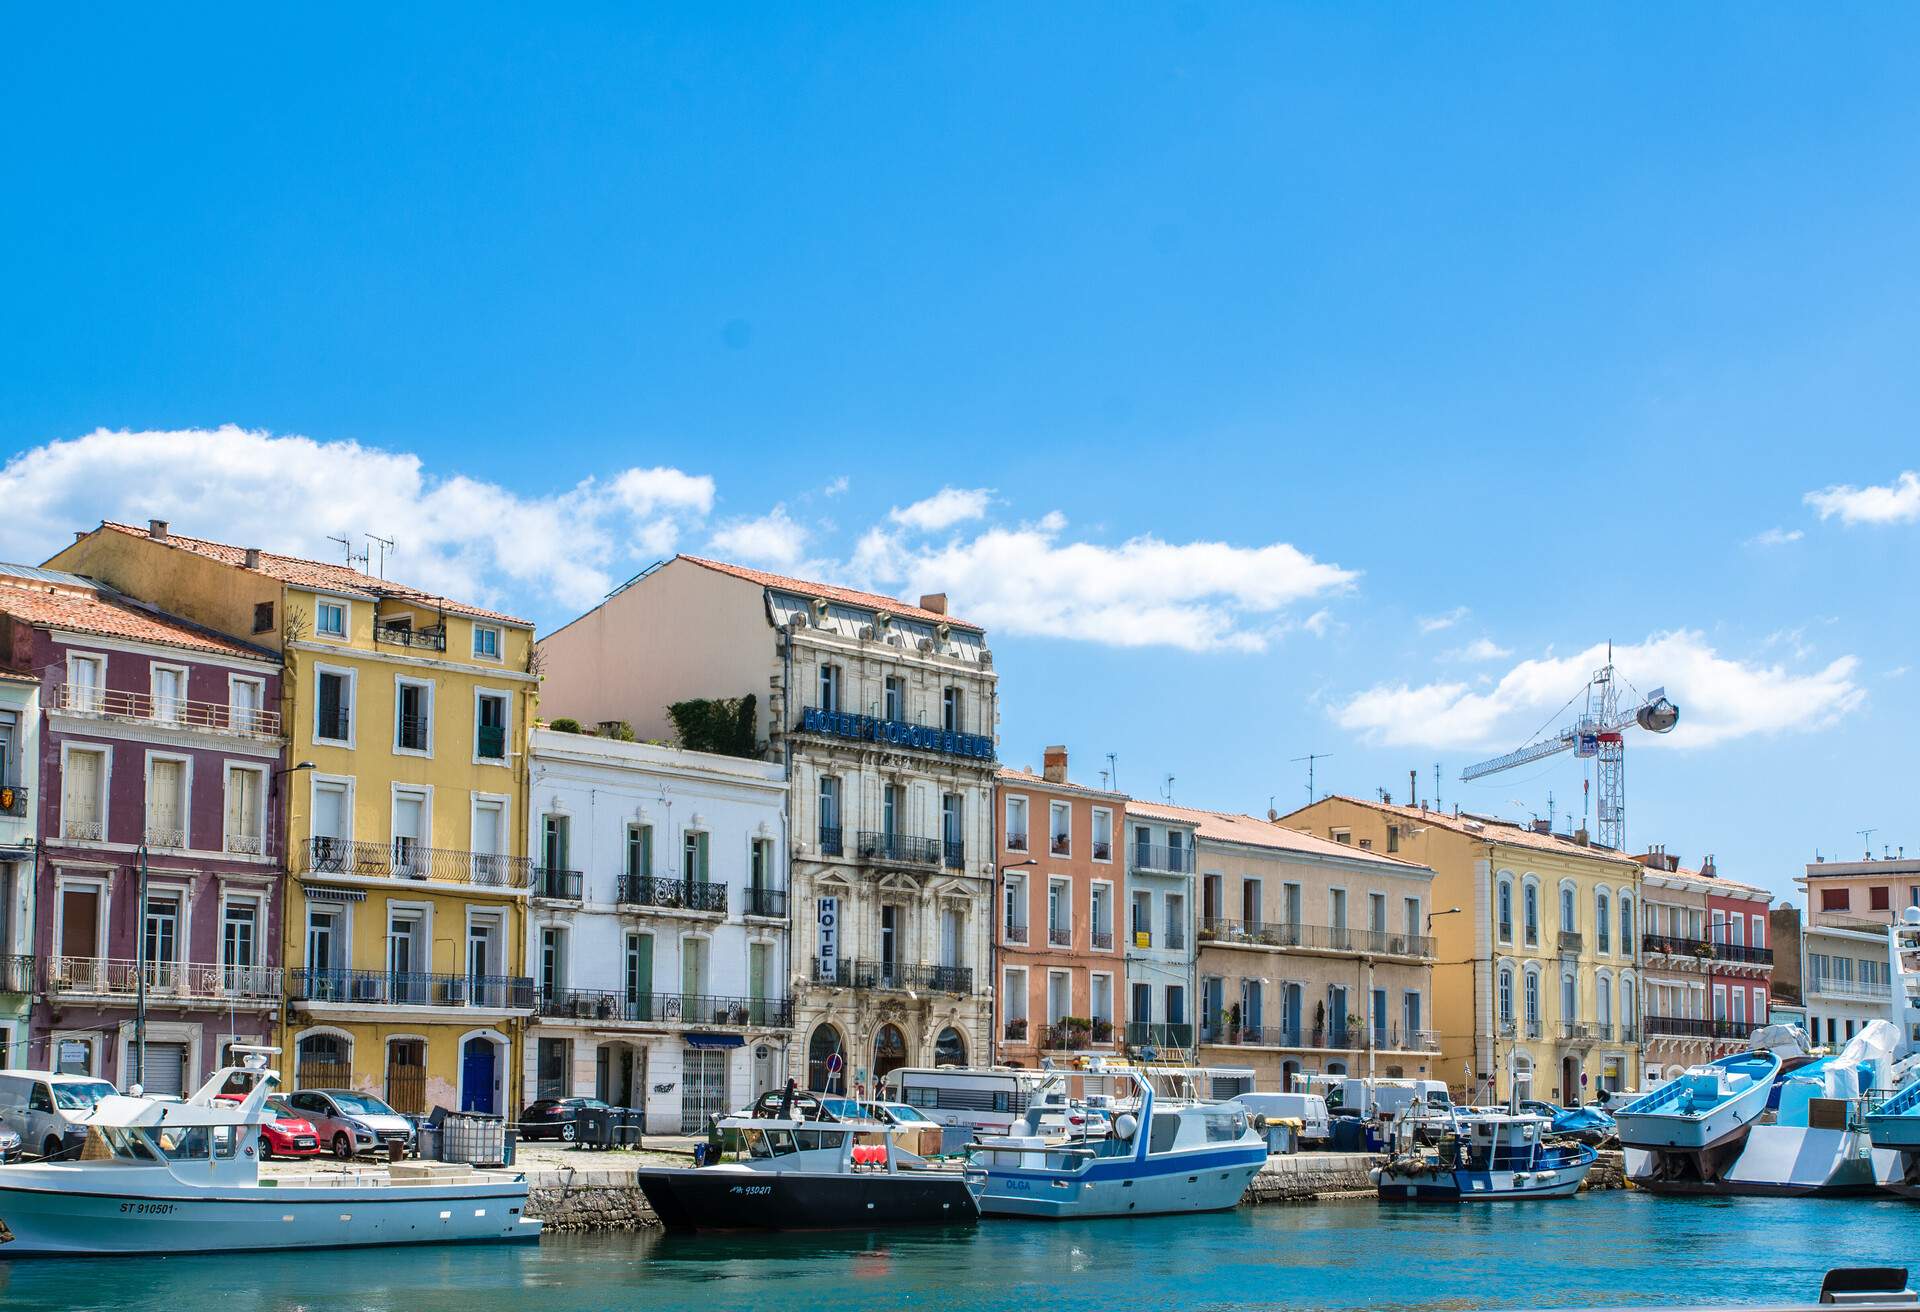 View of Sete, France with its waterways and colourful buildings on a sunny day